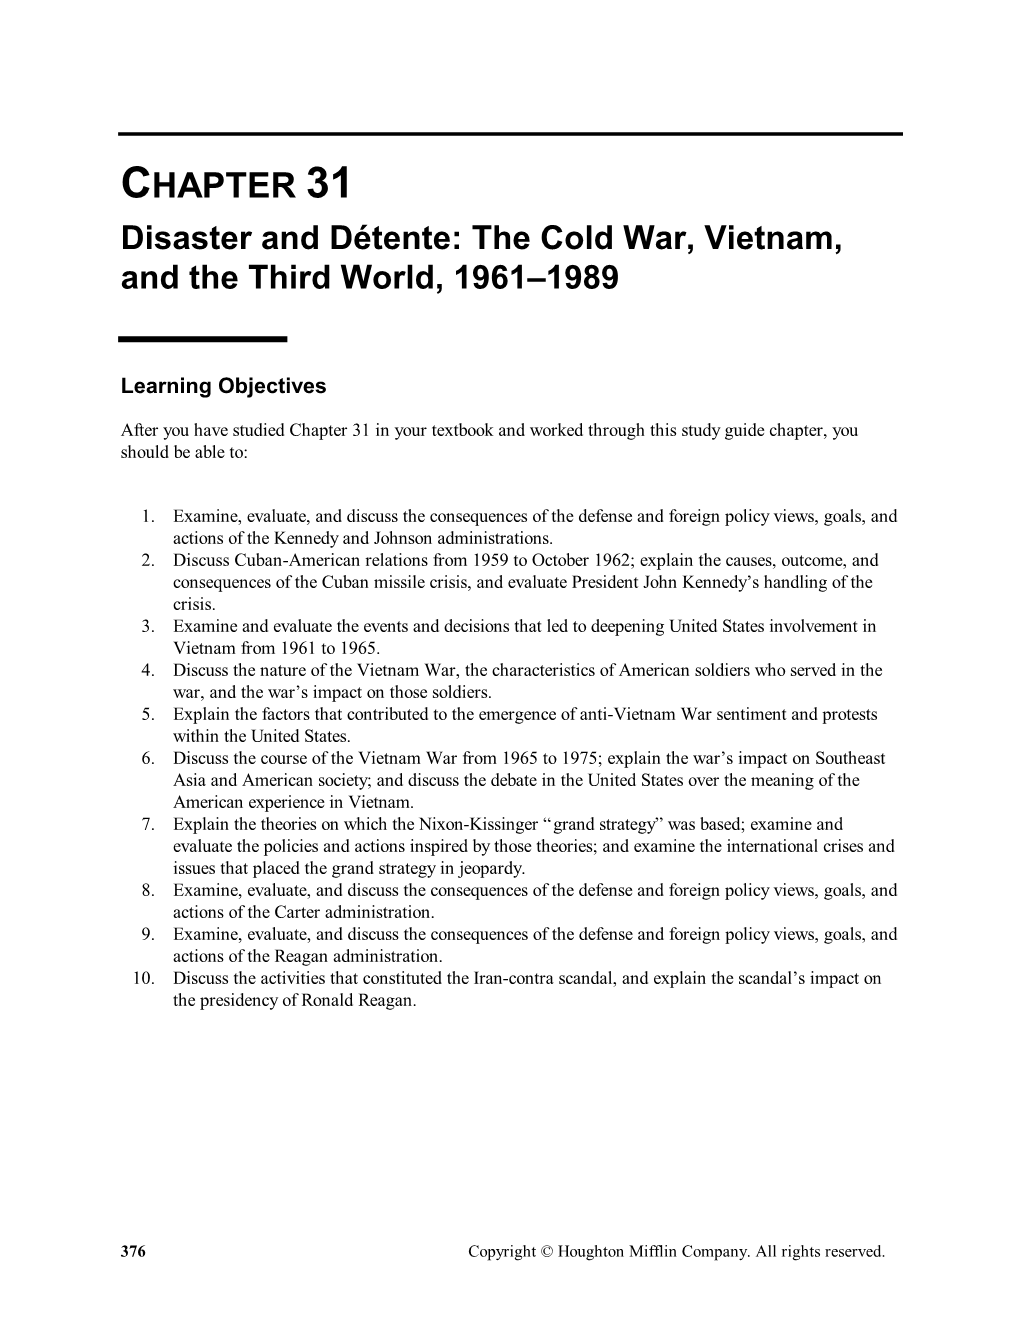 CHAPTER 31 Disaster and Détente: the Cold War, Vietnam, and the Third World, 1961–1989